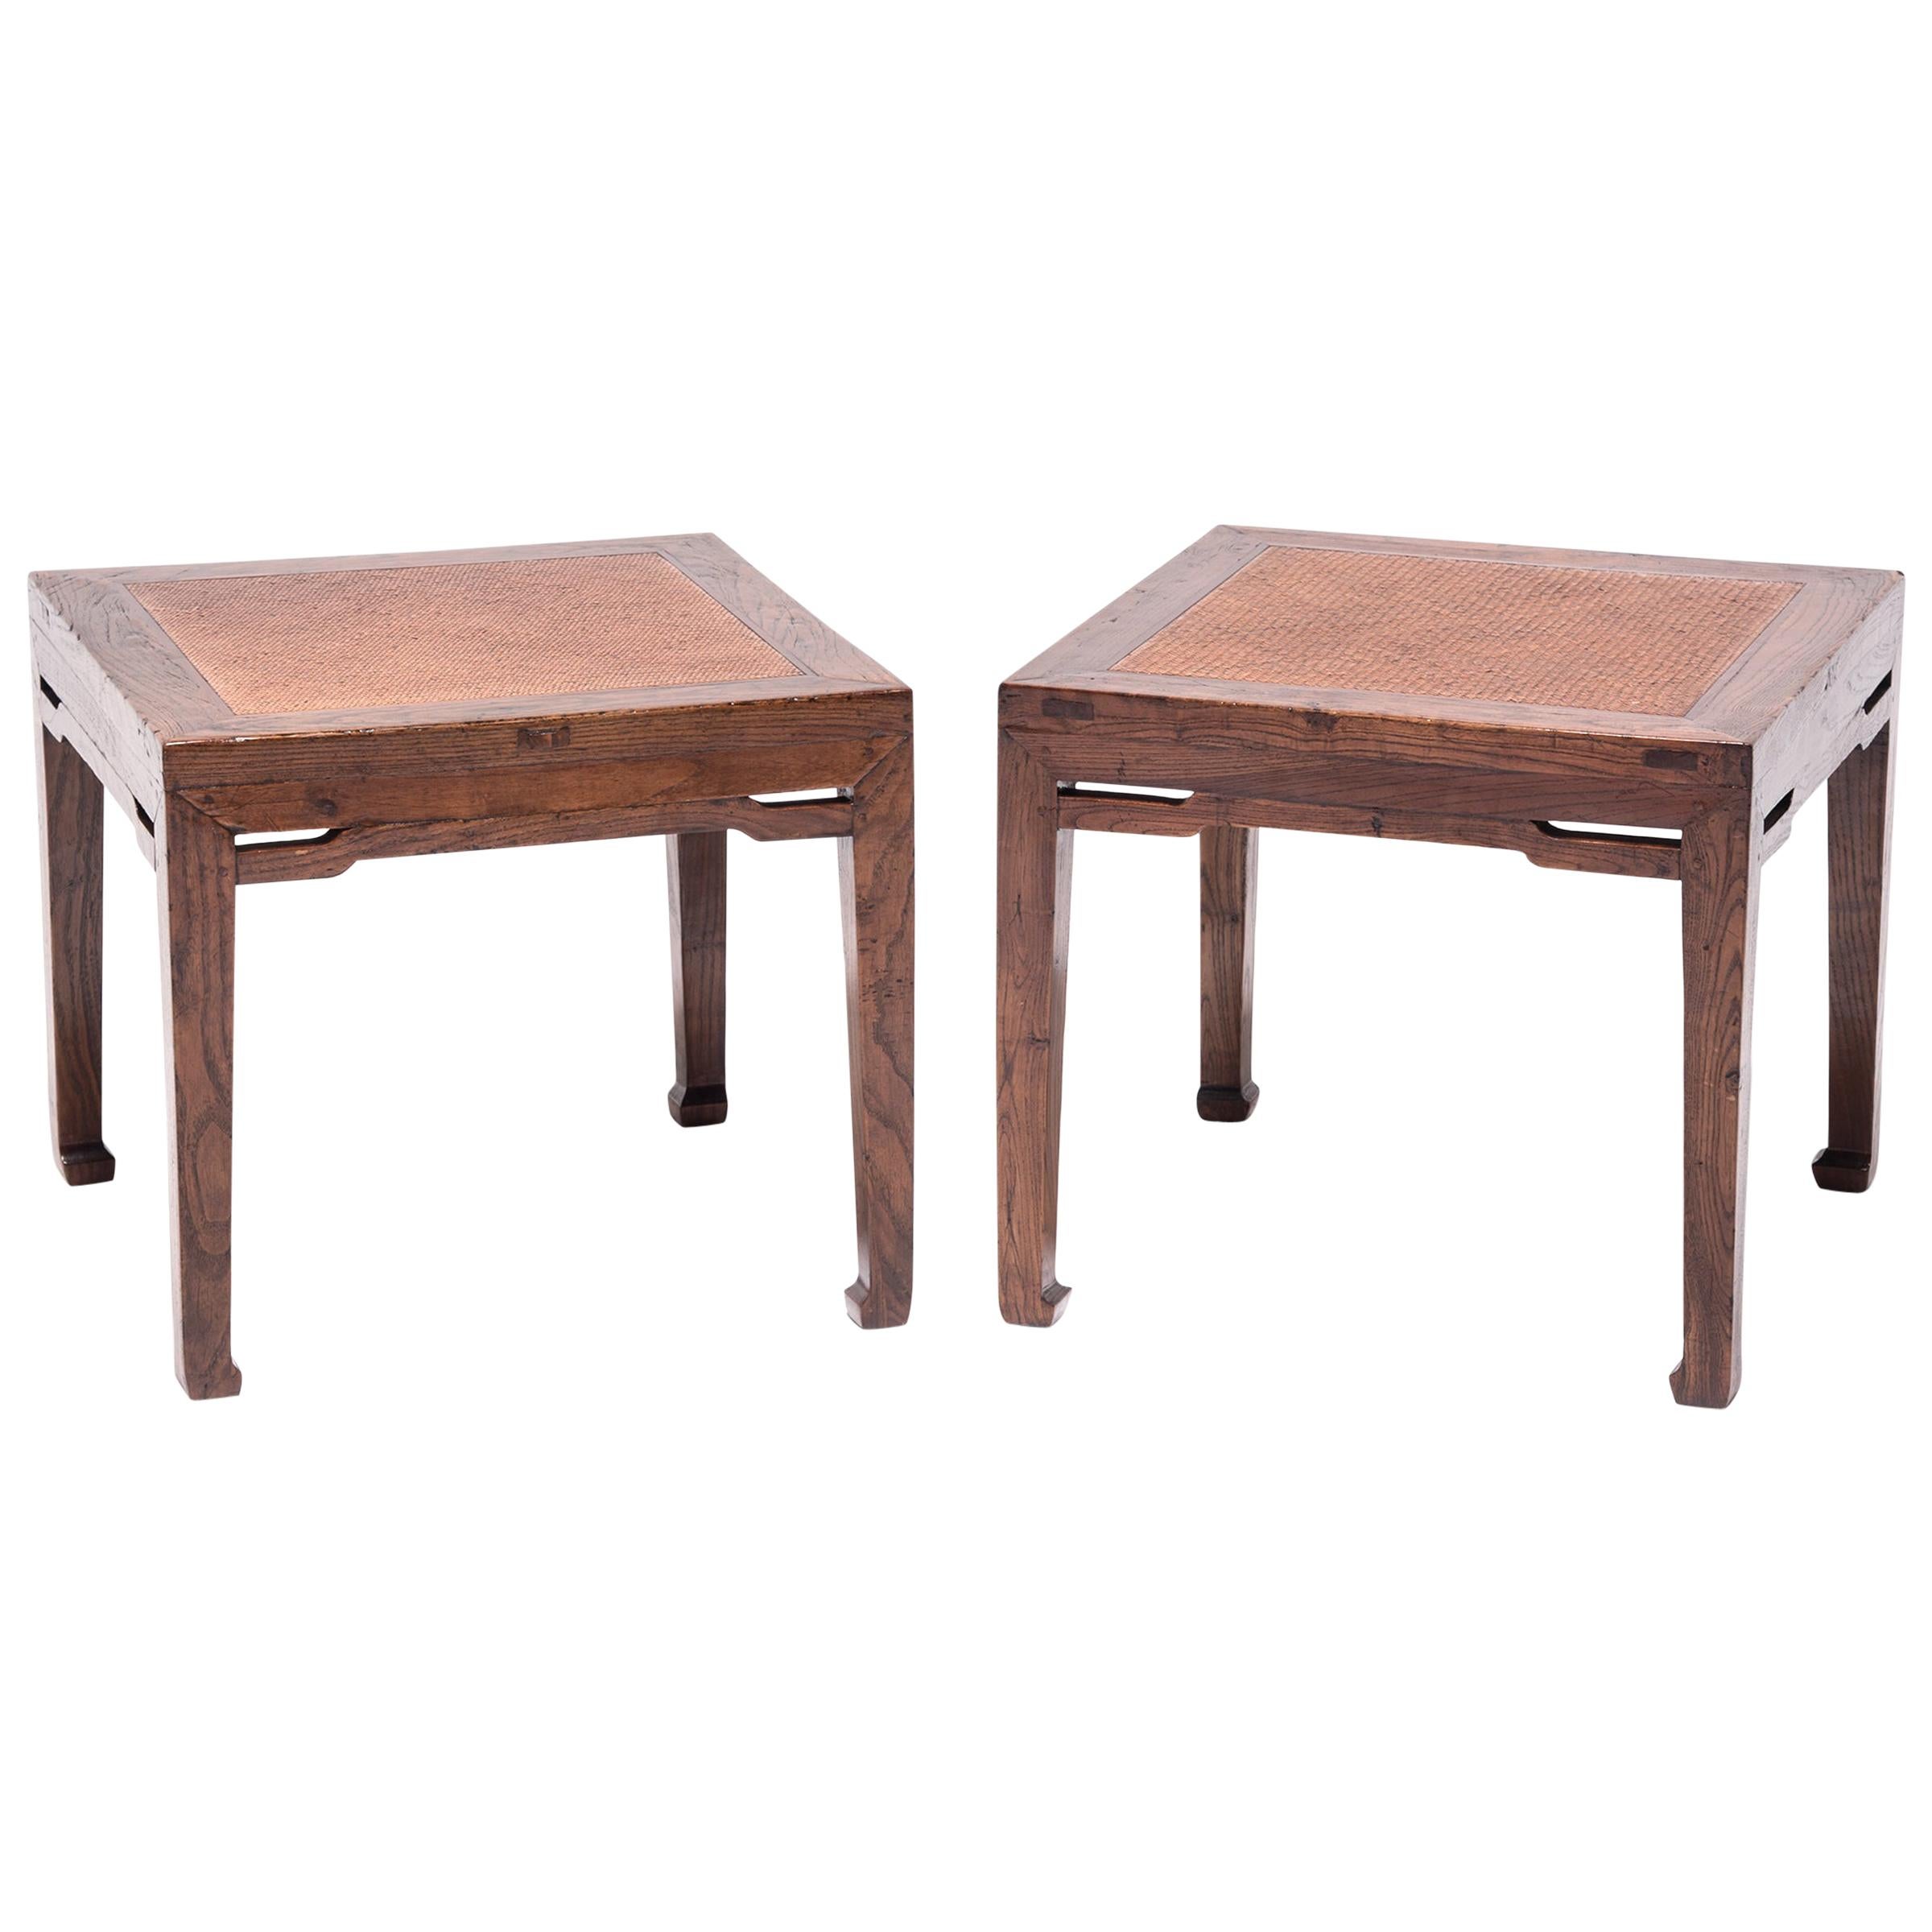 Pair of 19th Century Chinese Square Stools with Woven Tops